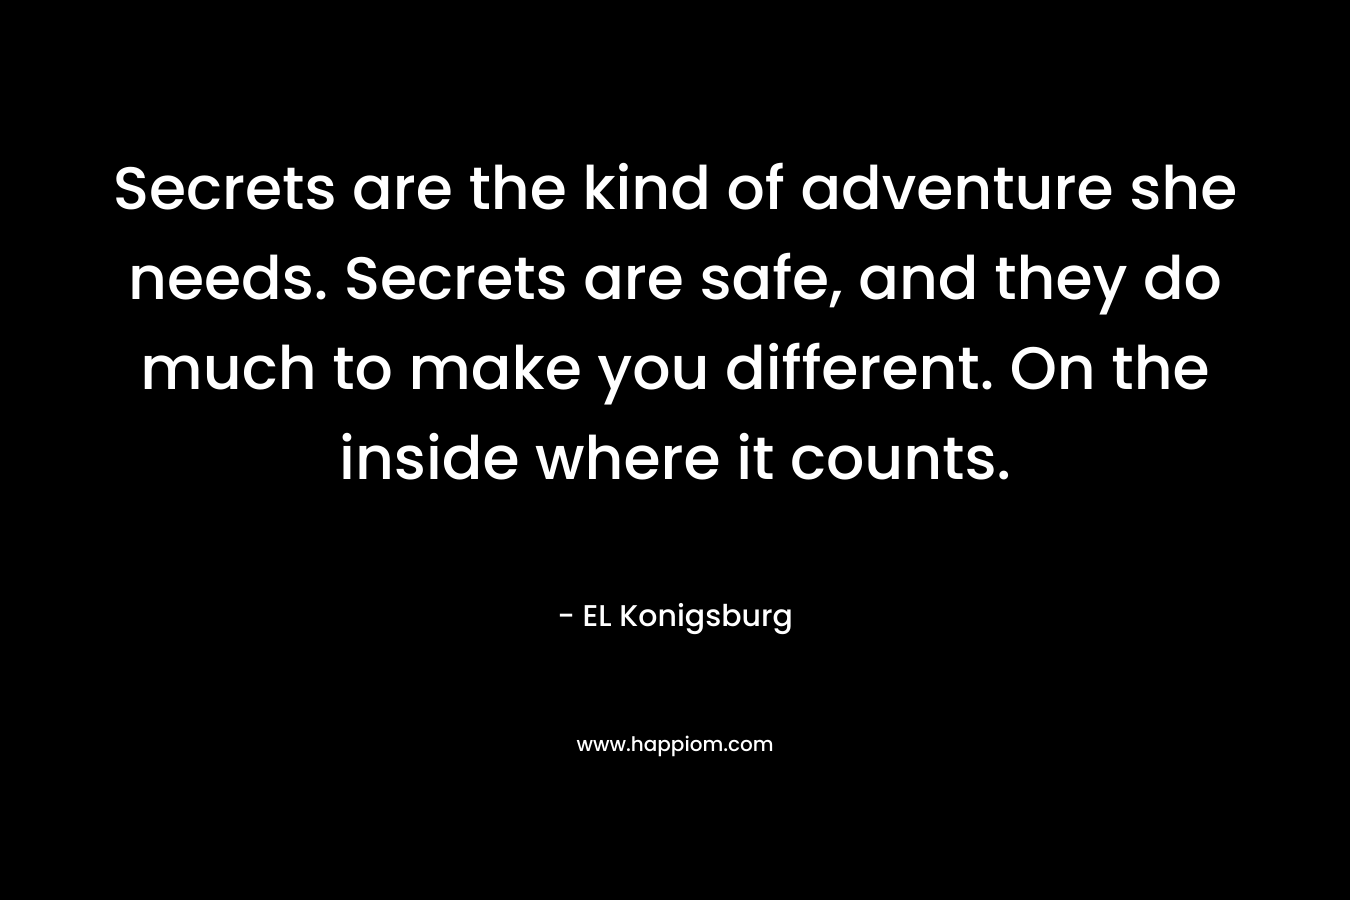 Secrets are the kind of adventure she needs. Secrets are safe, and they do much to make you different. On the inside where it counts.